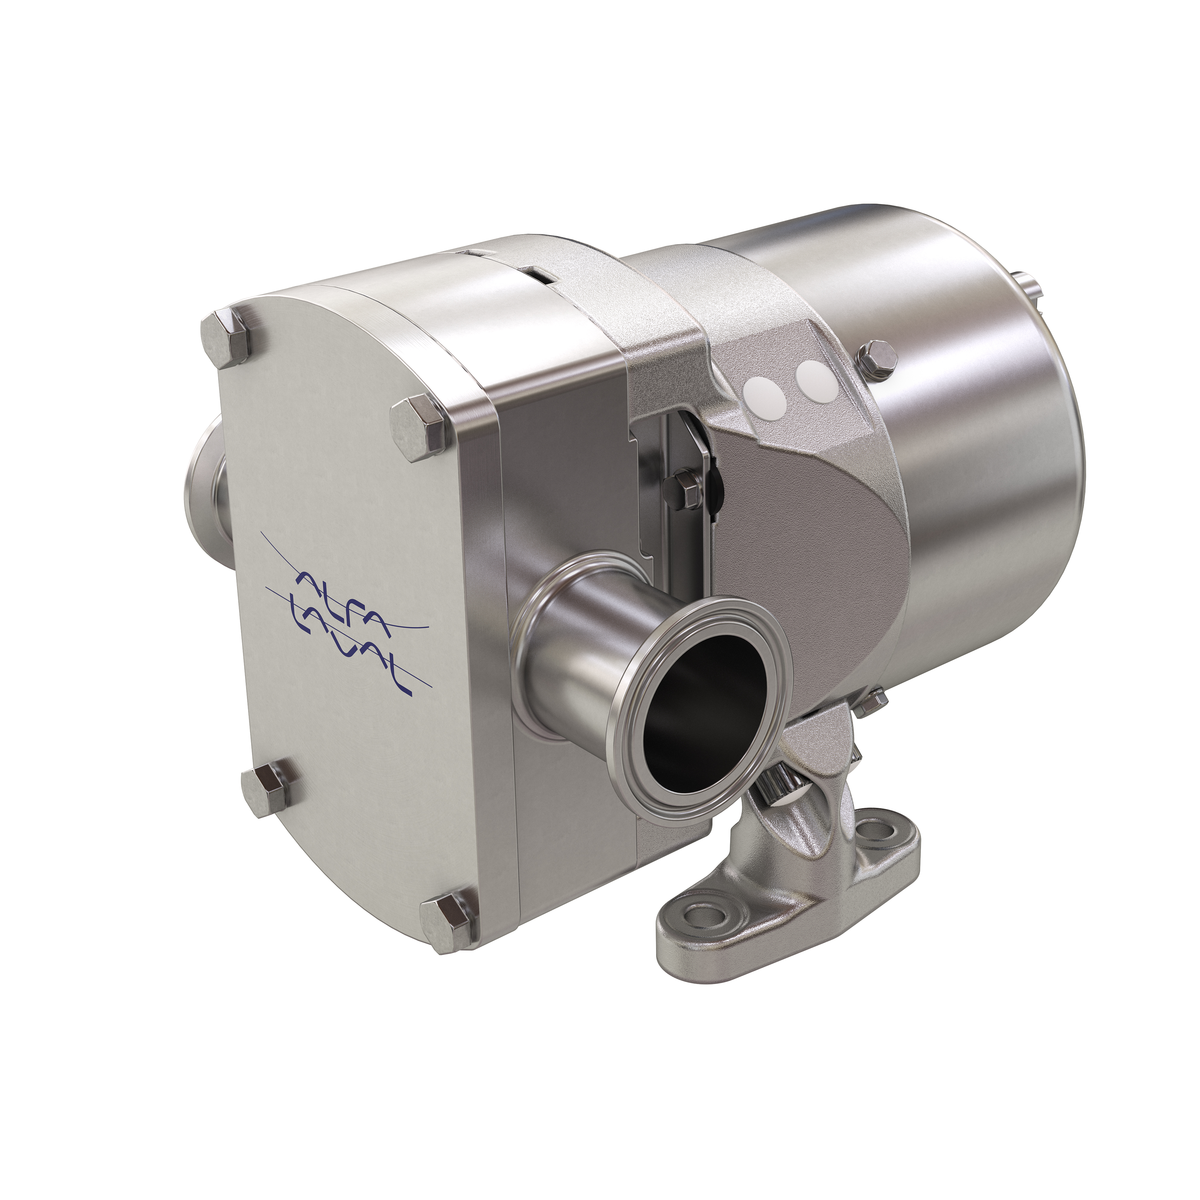 Alfa Laval's OptiLobe rotary lobe pumps are designed to meet the requirements of lower flow rates and higher production capacities.